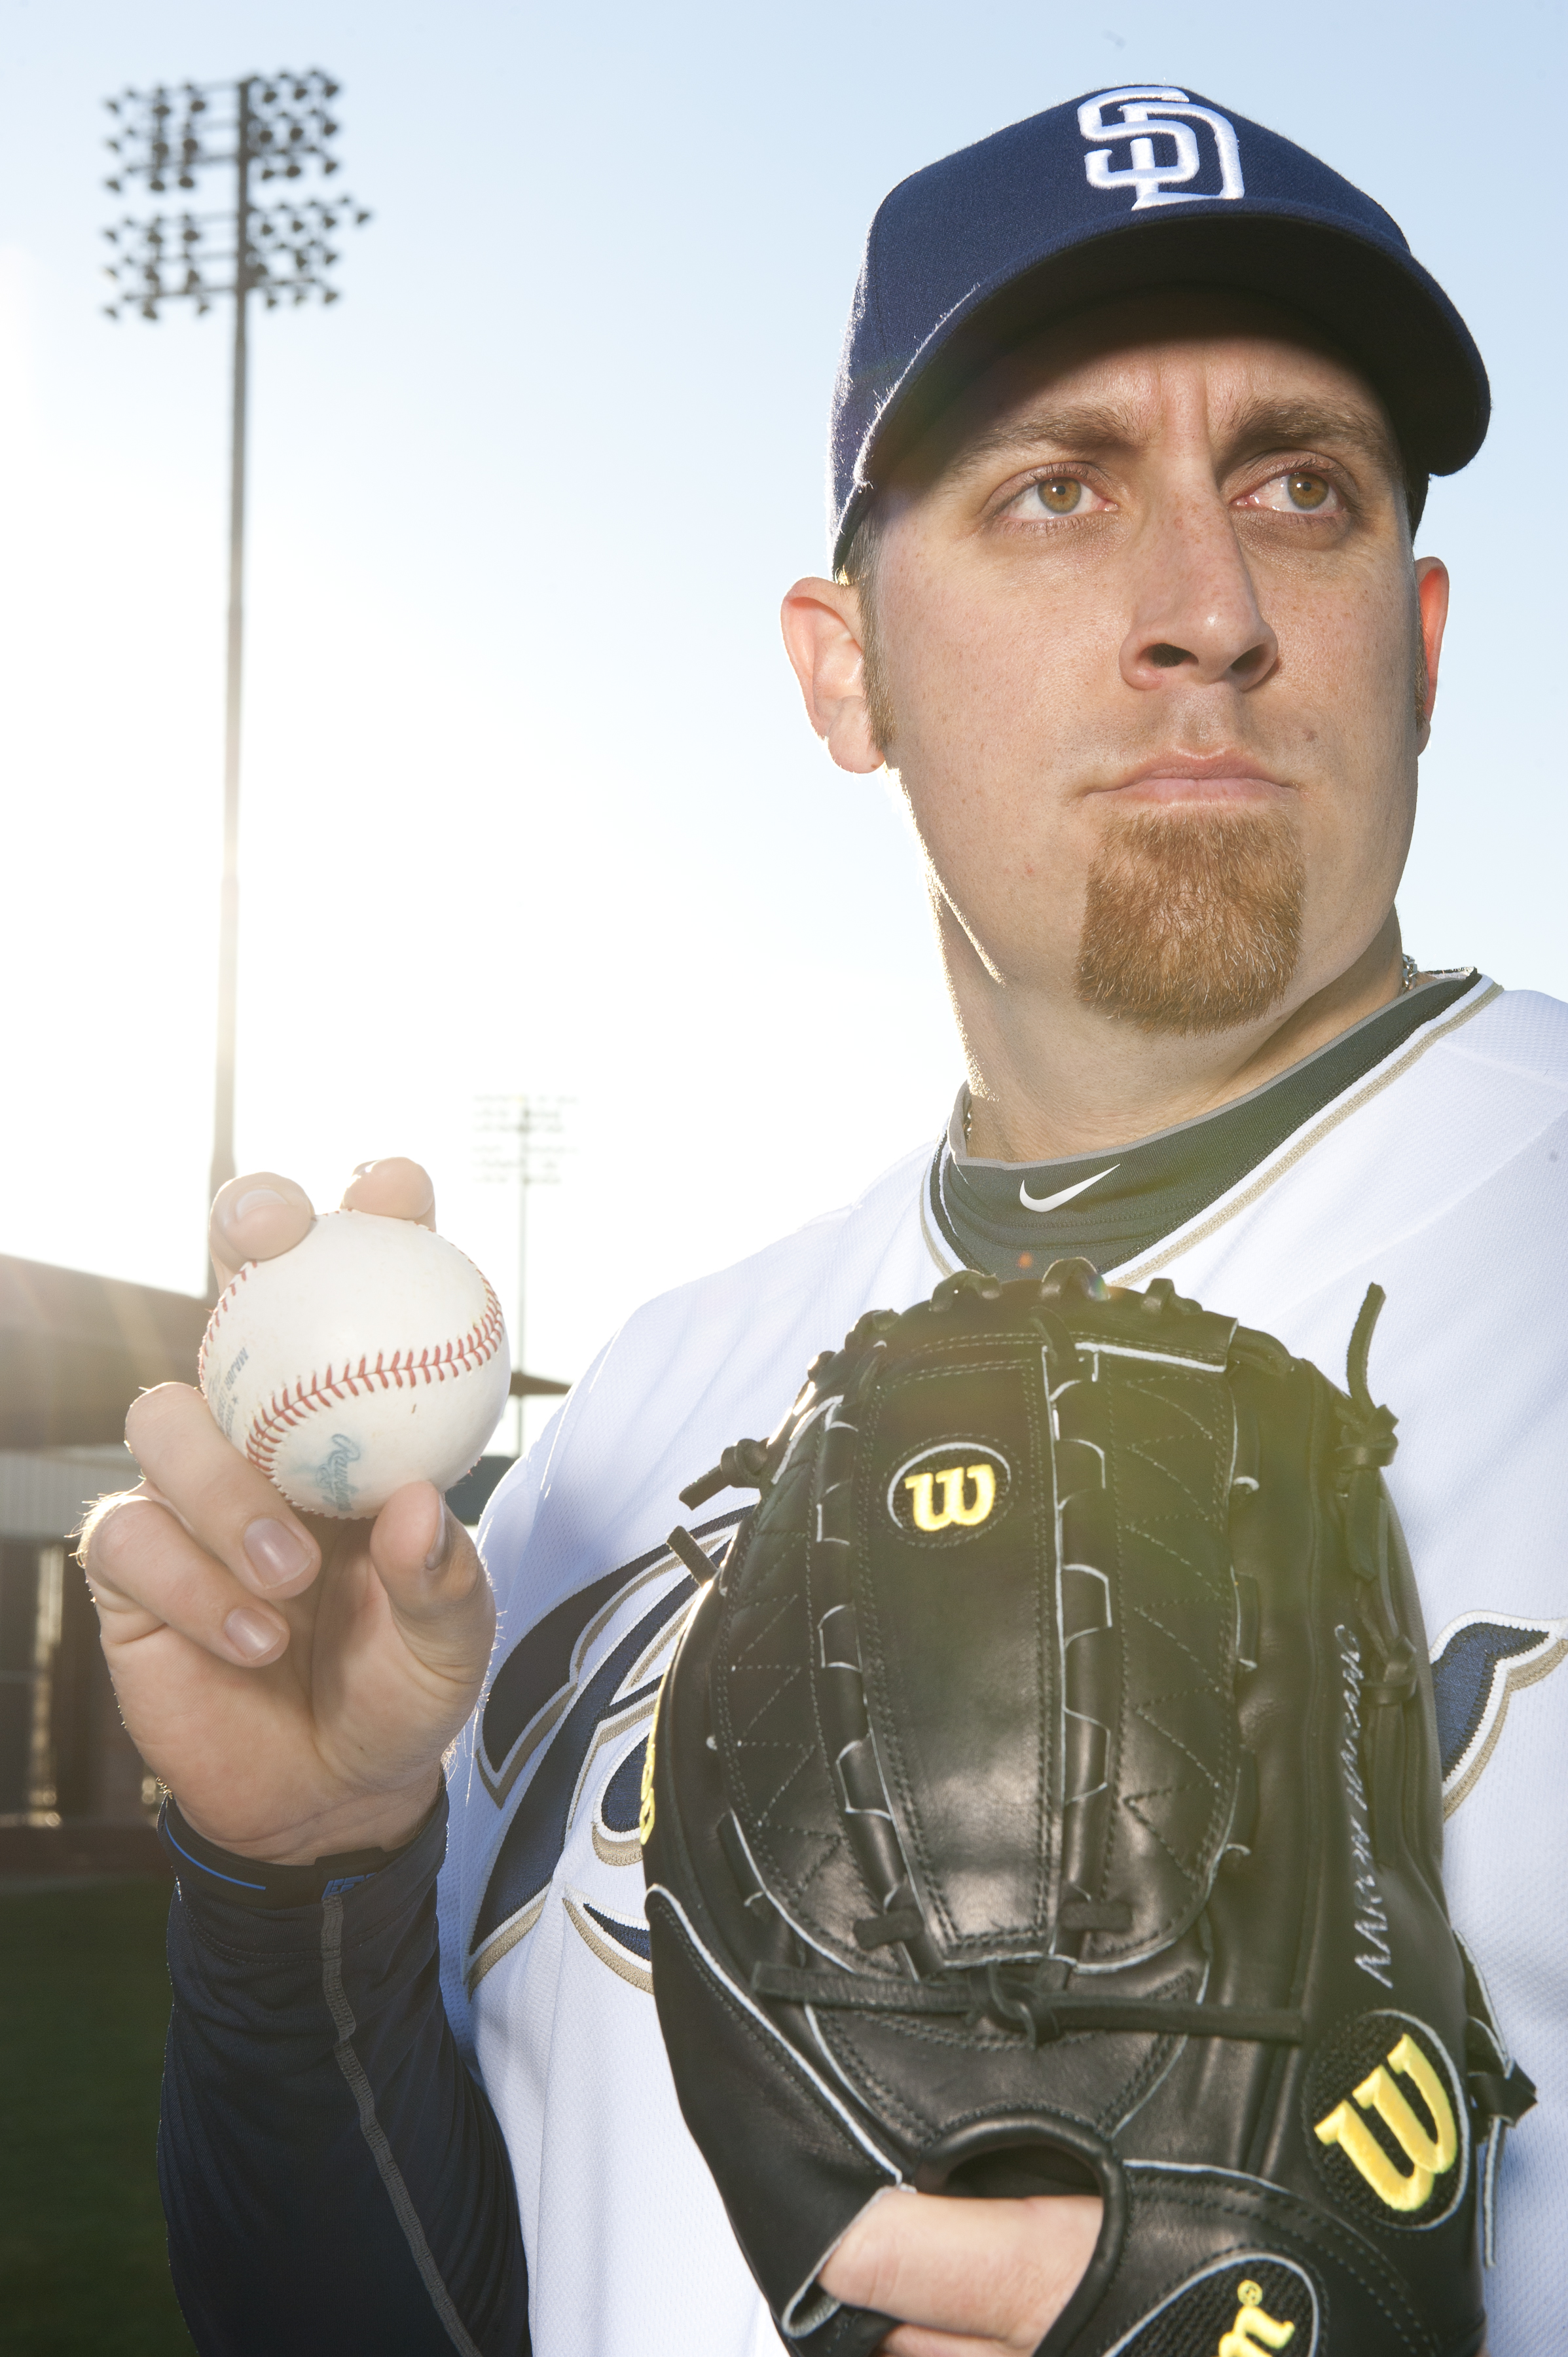 PEORIA, AZ - FEBRUARY 23: Aaron Harang #41 of the San Diego Padres poses during their photo day at the Padres Spring Training Complex on February 23, 2011 in Peoria, Arizona. (Photo by Rob Tringali/Getty Images)